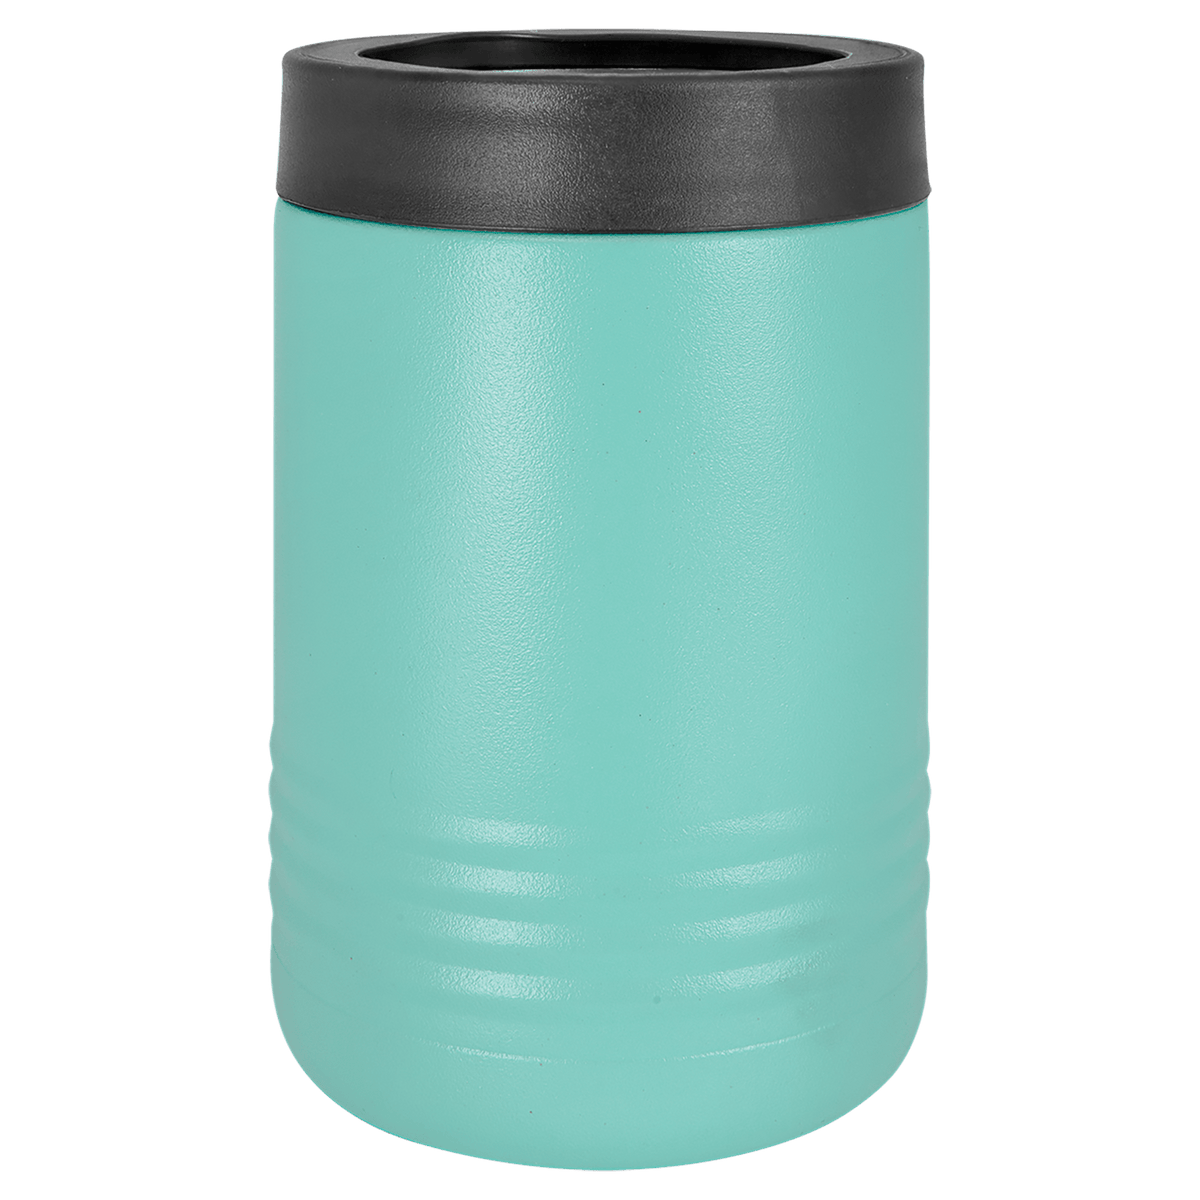 Polar Camel Stainless Steel Vacuum Insulated Beverage Holder Teal